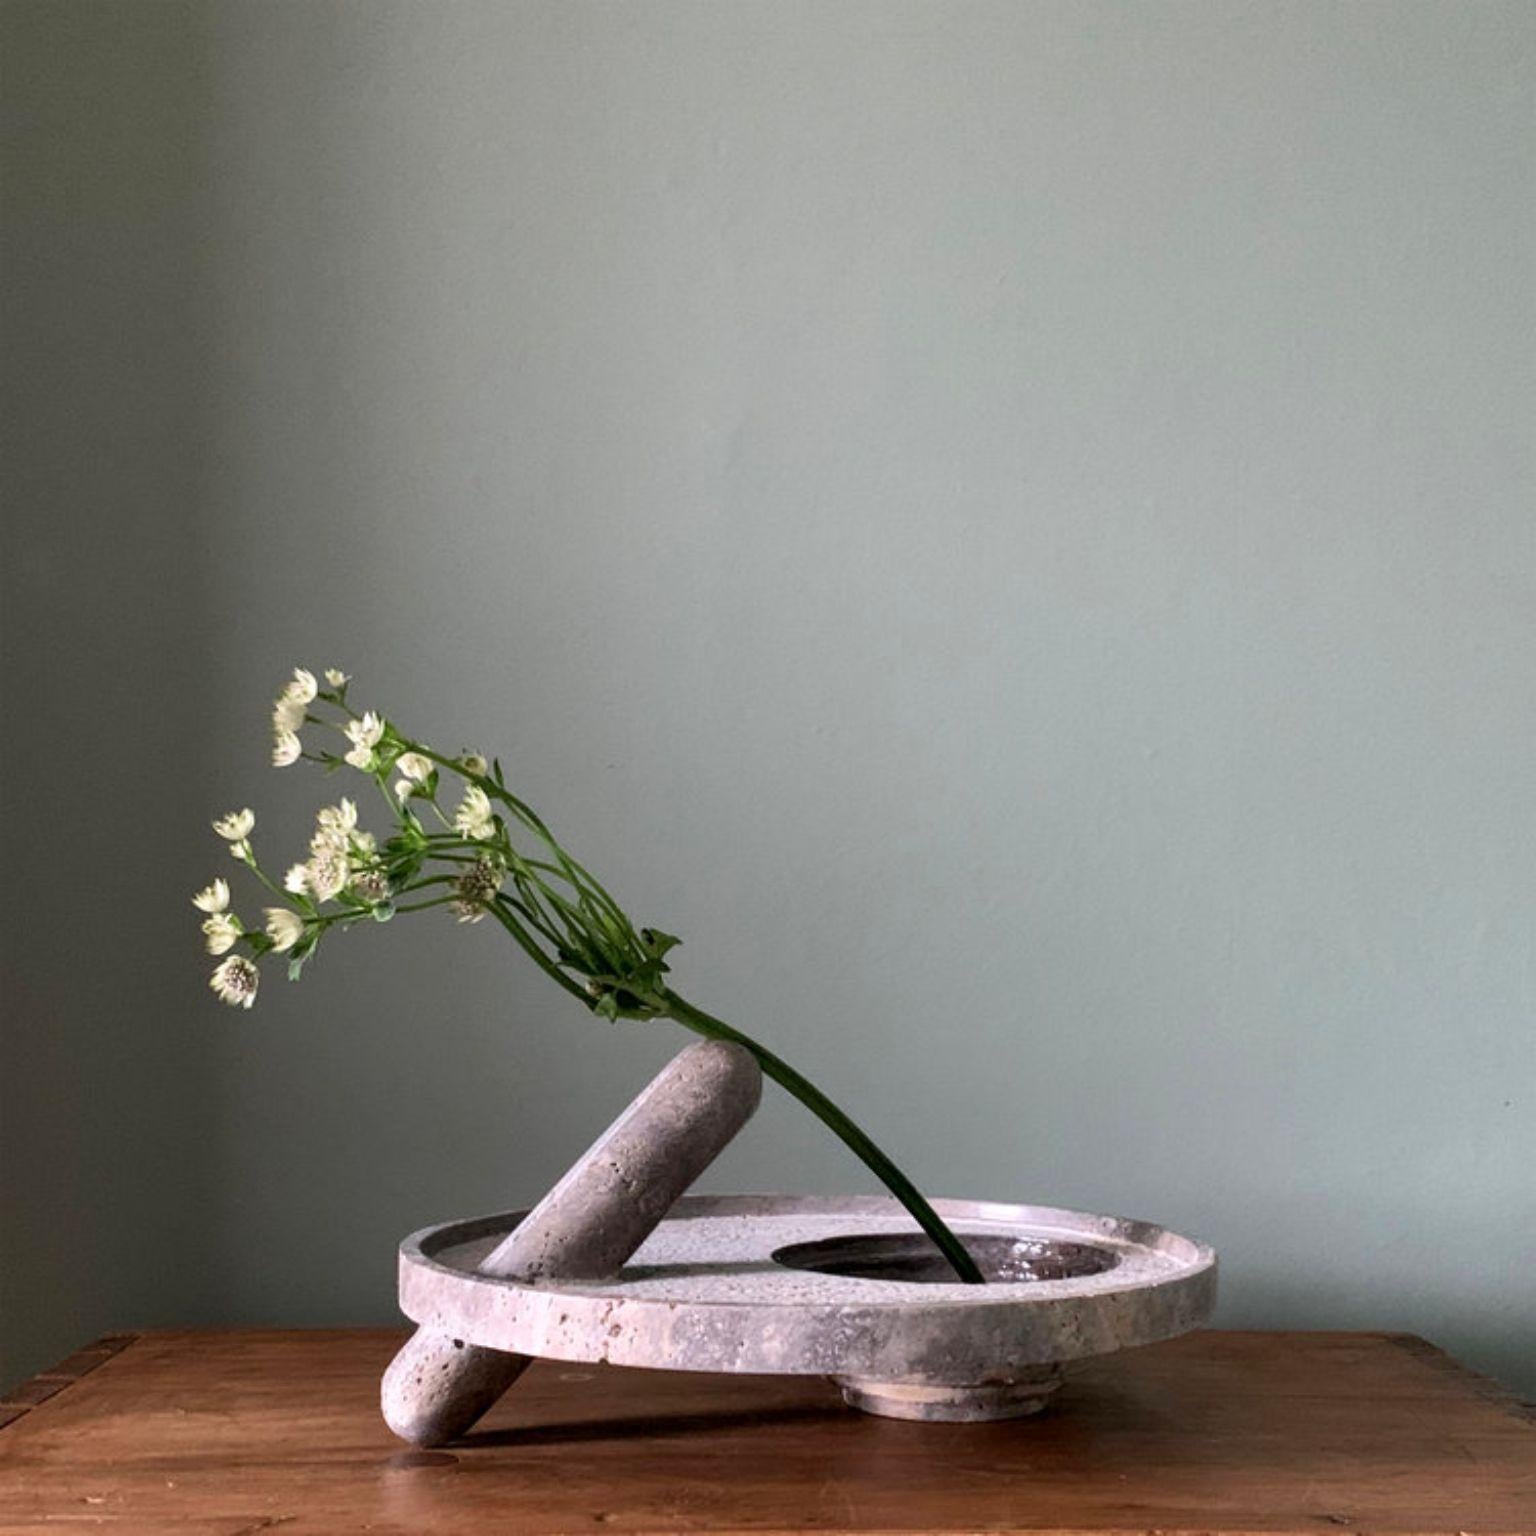 45 degrees single flower vase by Pete Pongsak
2018
Materials: Silver travertine
Dimensions: diameter 34 x height 16 cm
Made in Italy

Hand craved from a single piece of stone.

ARCHIVE & ARCHIVE Studio specializes in creating functional